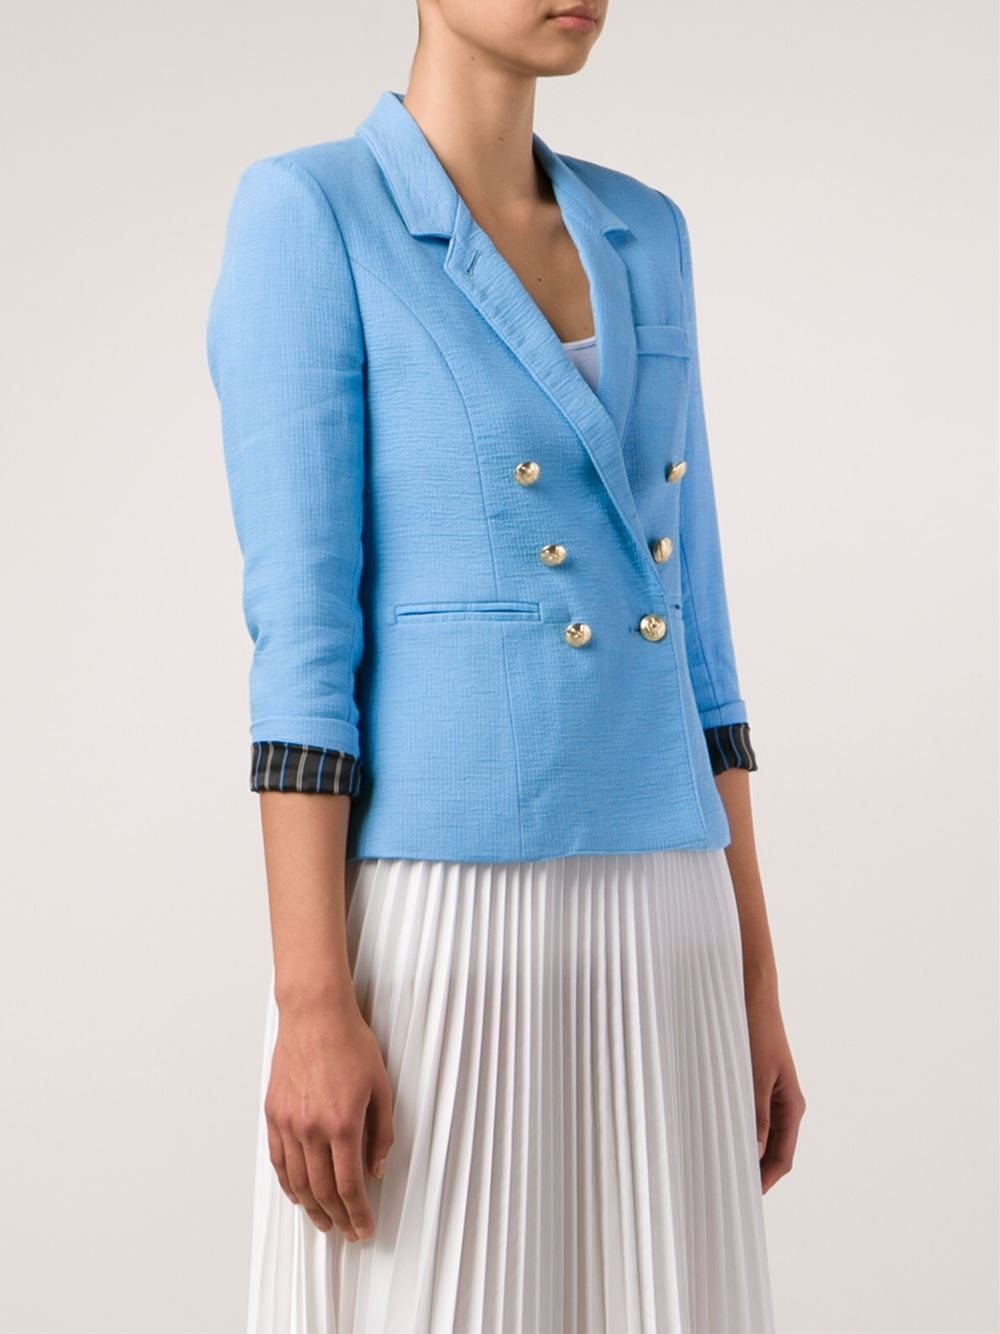 Lyst - Smythe Double Breasted Blazer in Blue